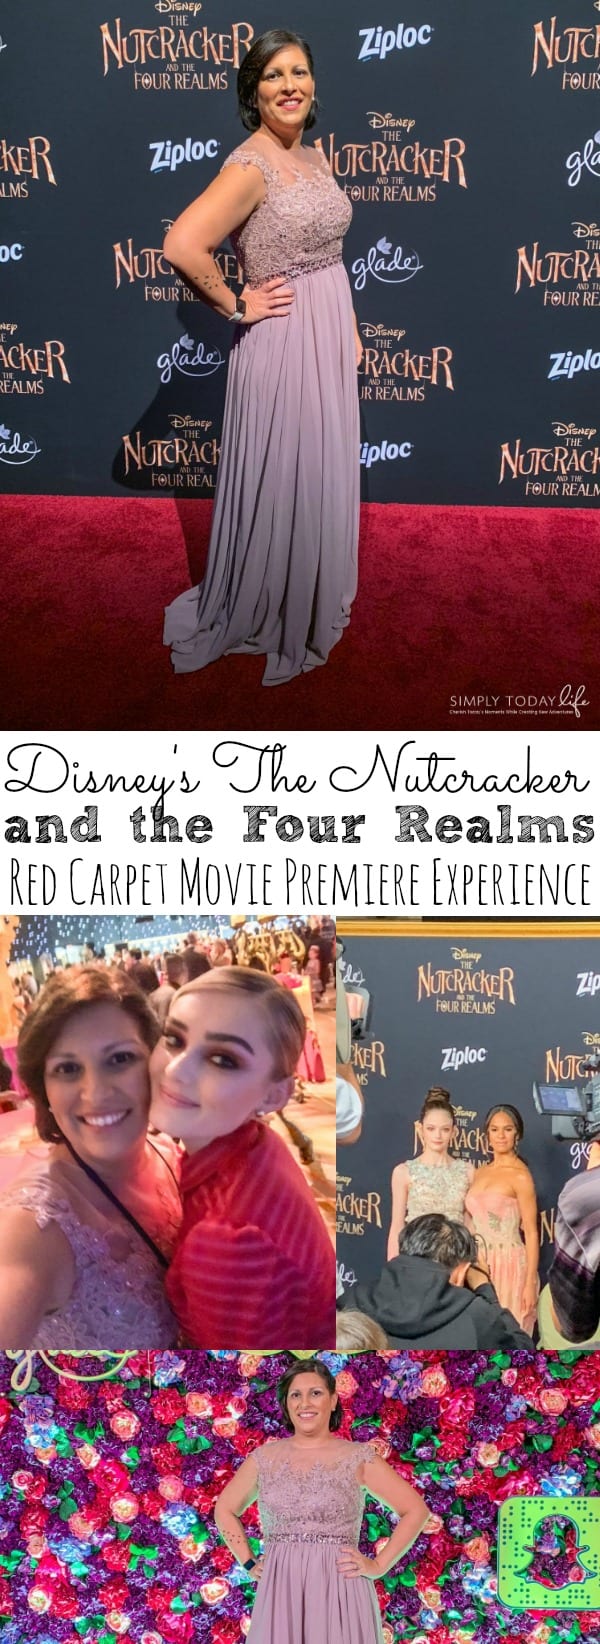 The Nutcracker and the Four Realms Red Carpet Movie Premiere Experience